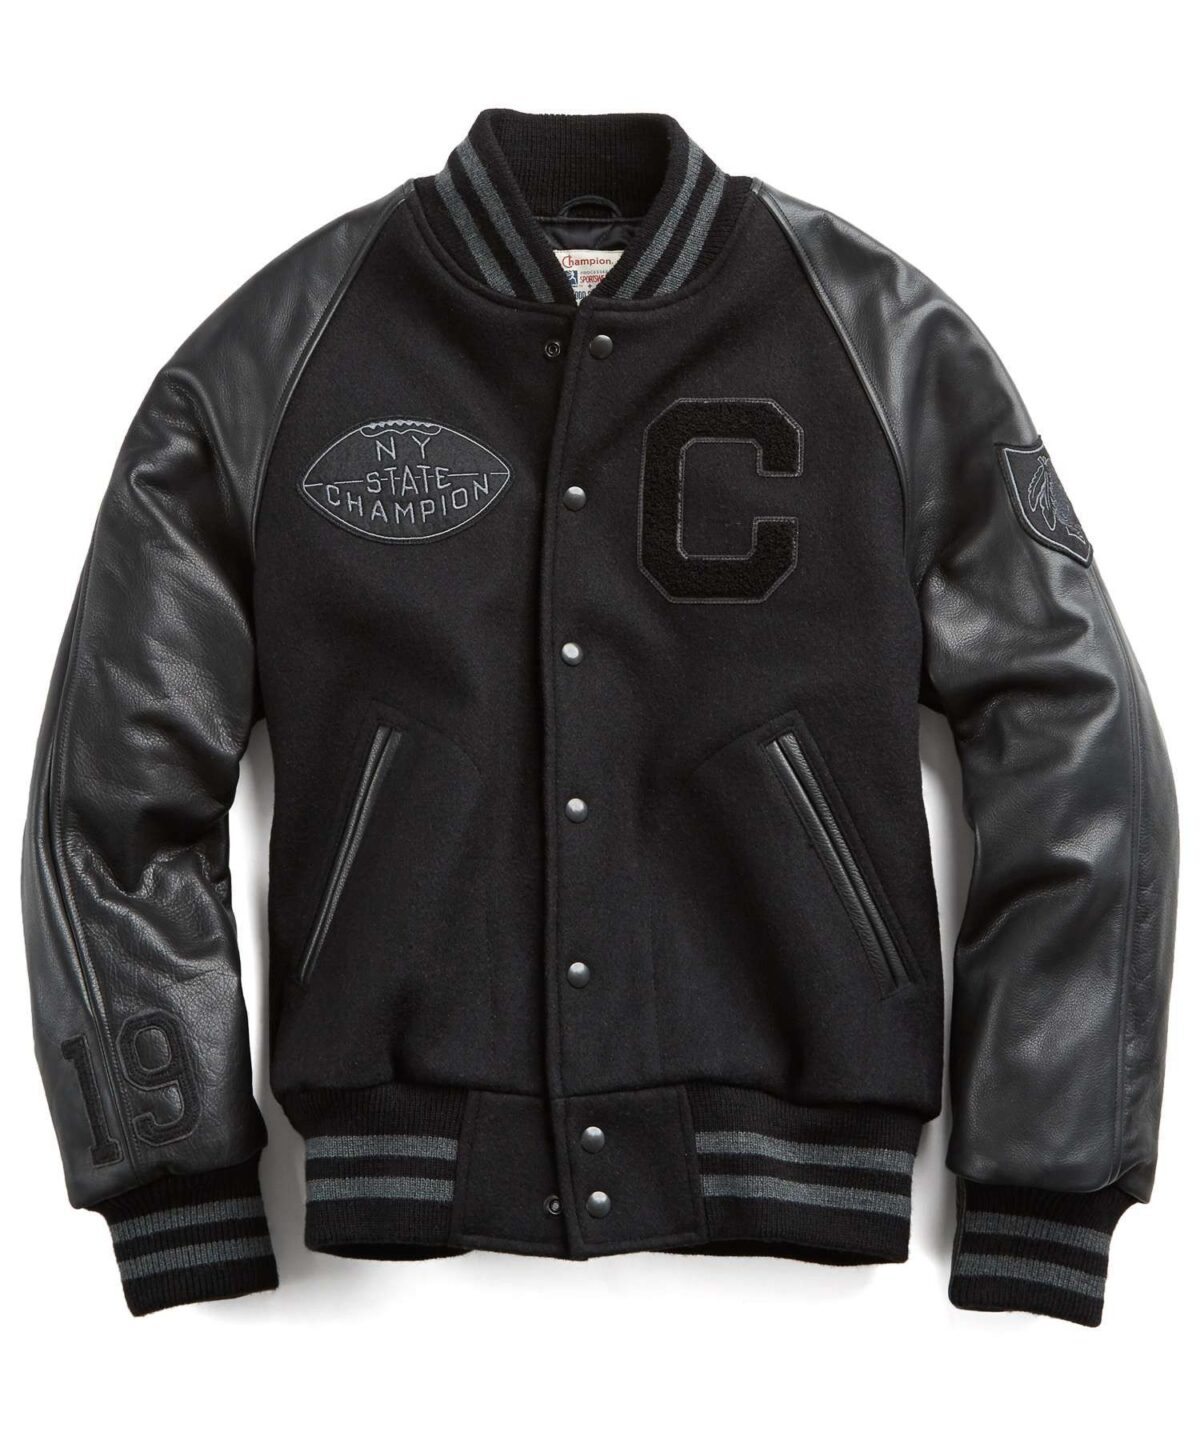 Wool Body And Leathers Sleeves Black Letter Man Bombers Versity jackets With Embriodery 1